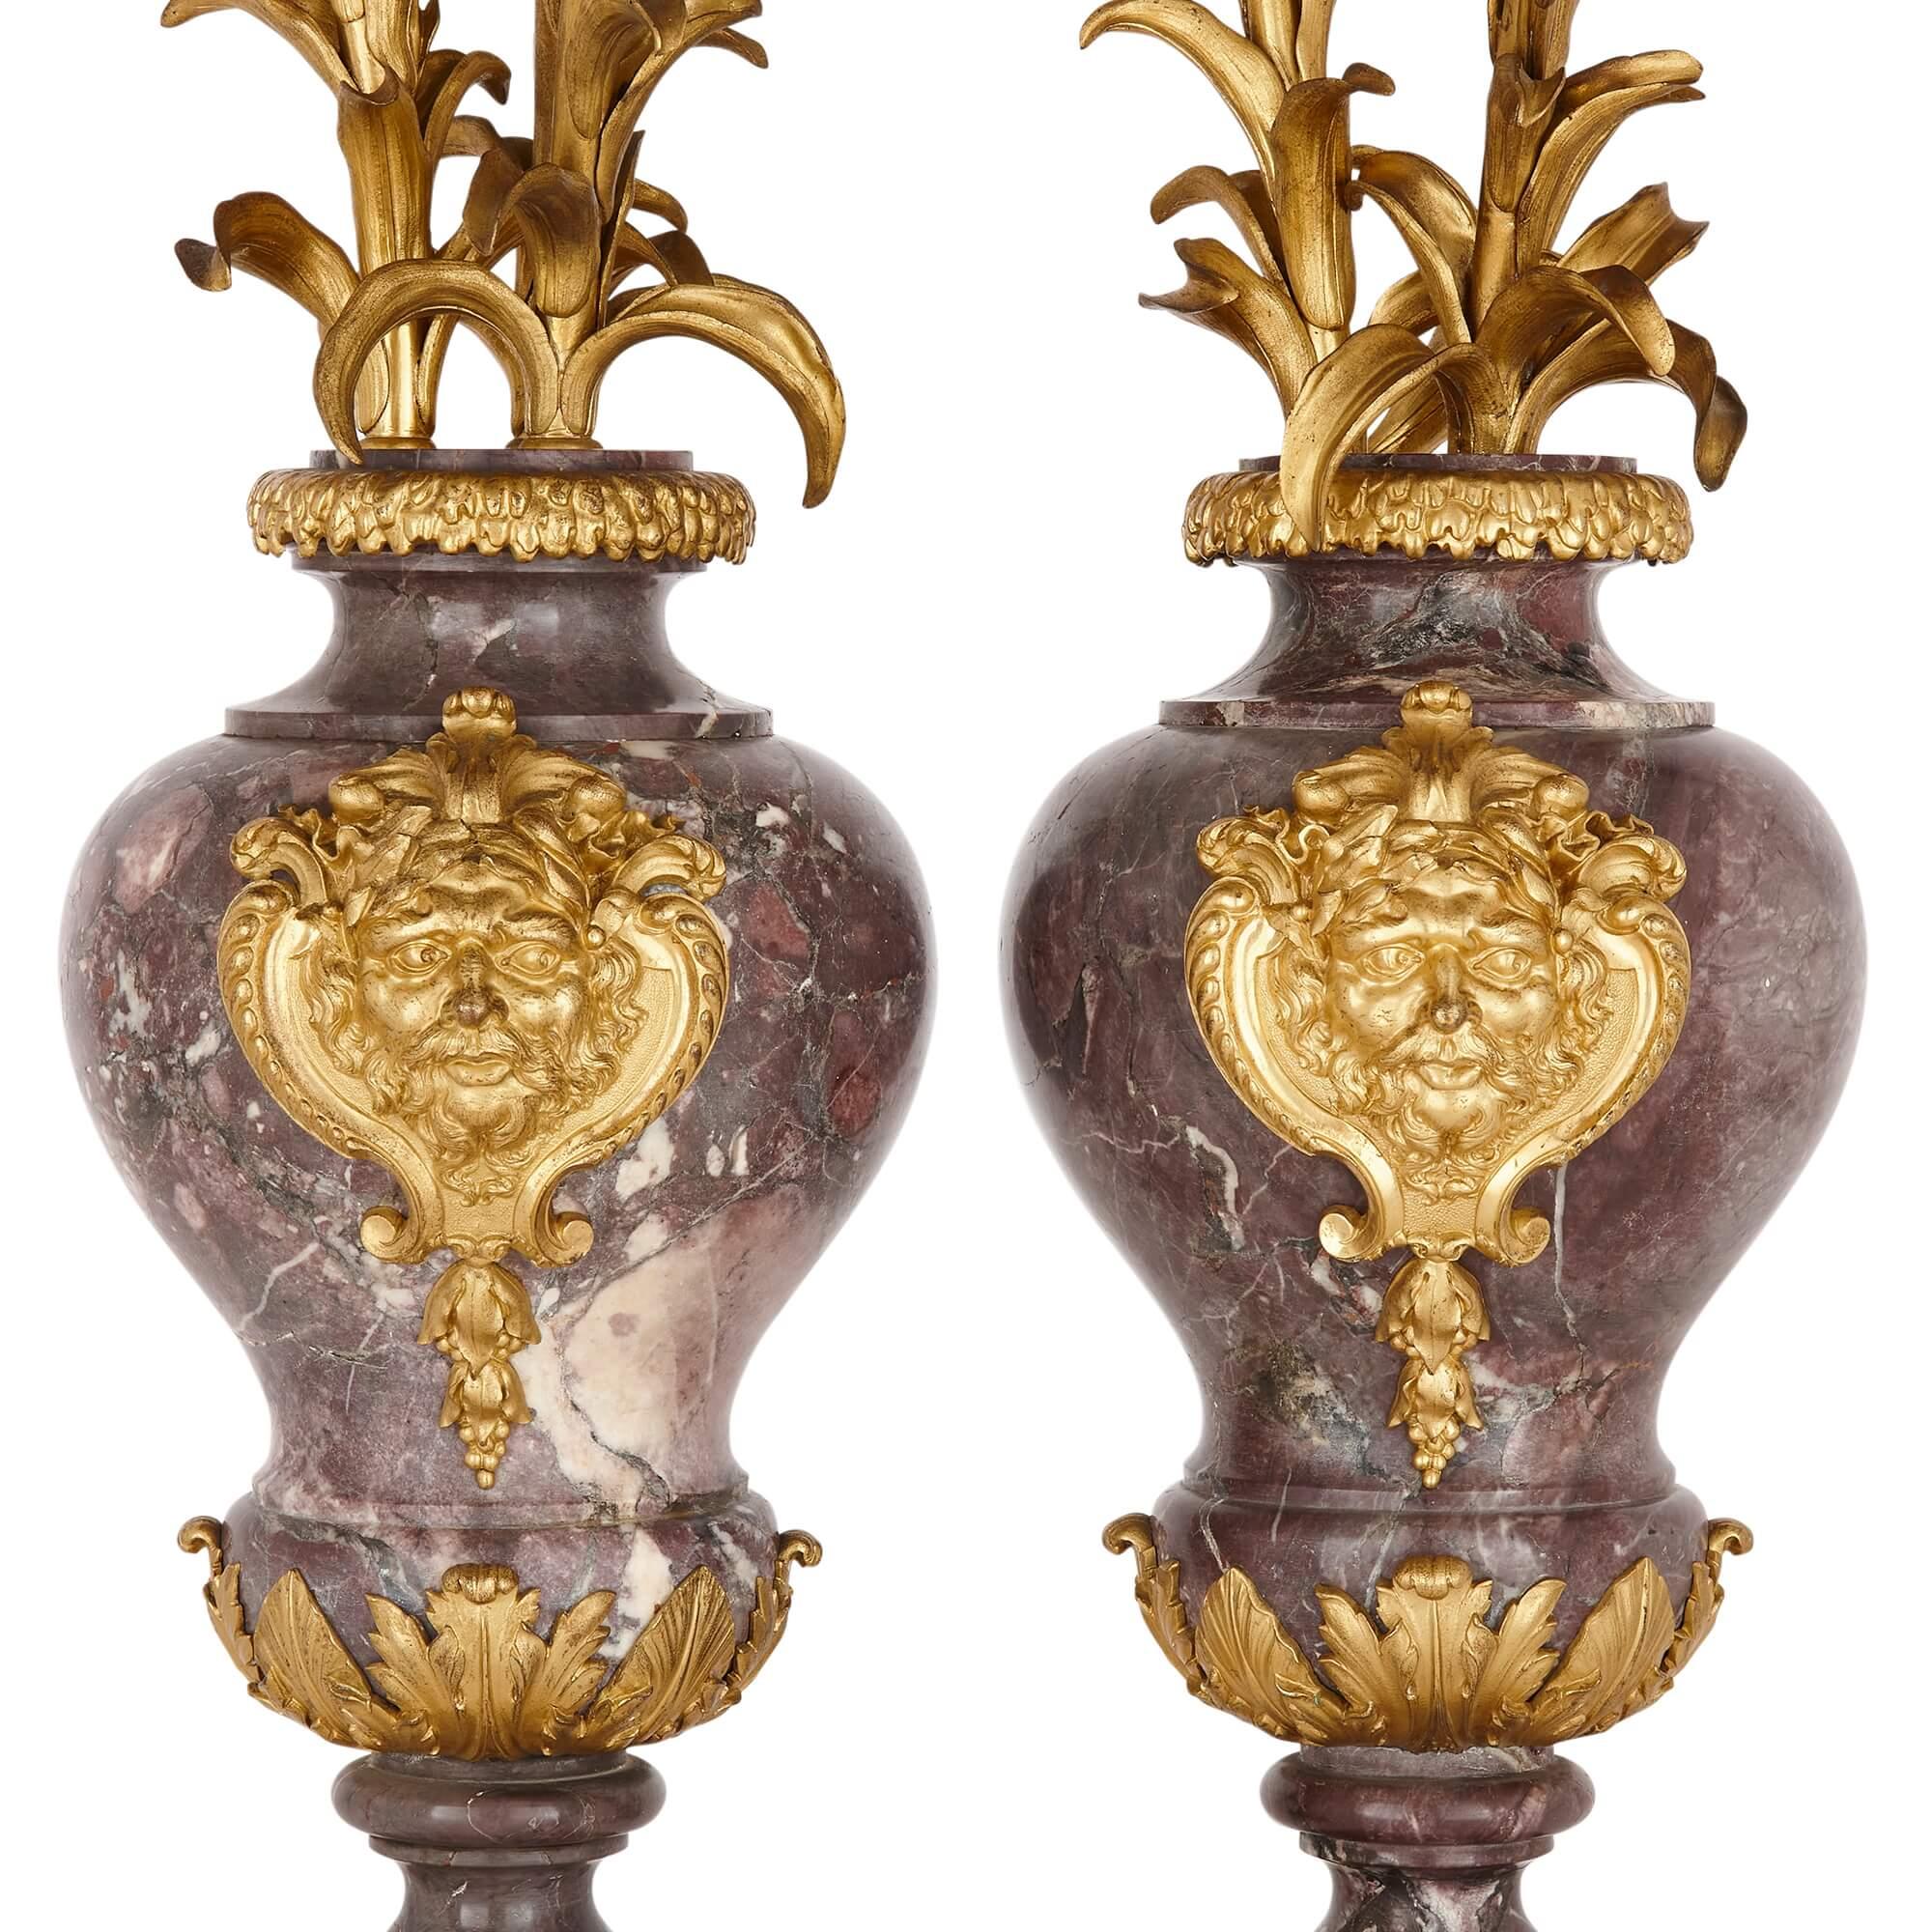 French Pair of Large Rococo Style Gilt-Bronze and Marble Candelabra For Sale